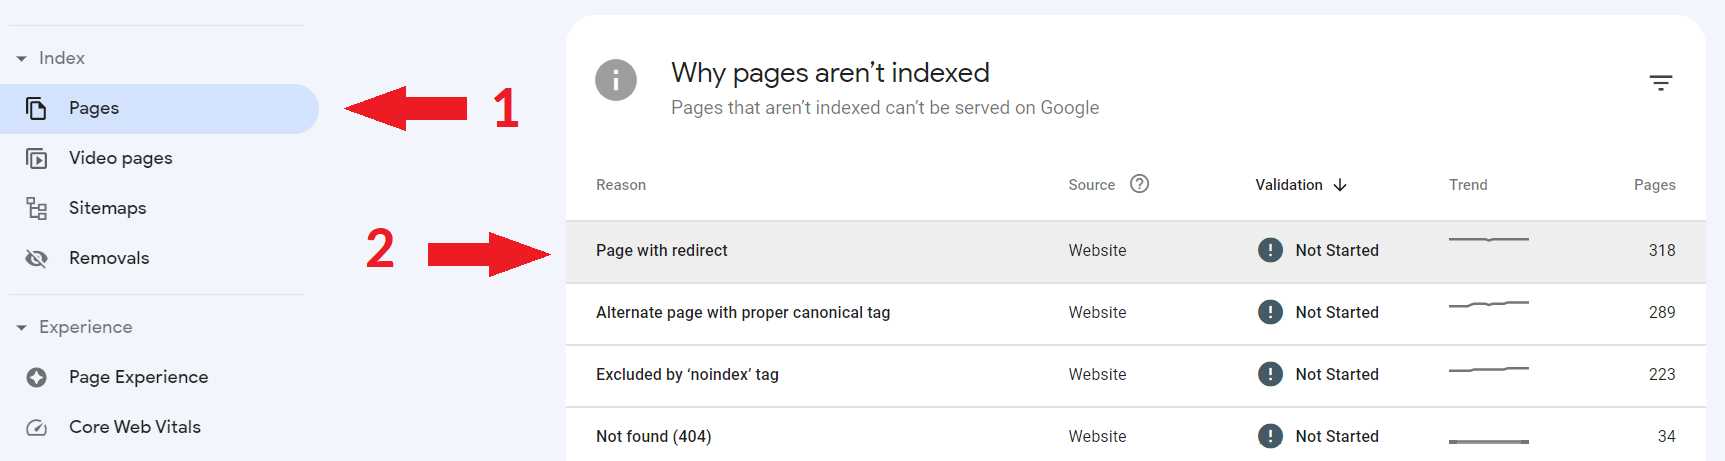 A screenshot showing where to find the "Page with redirect" status in Google Search Console.